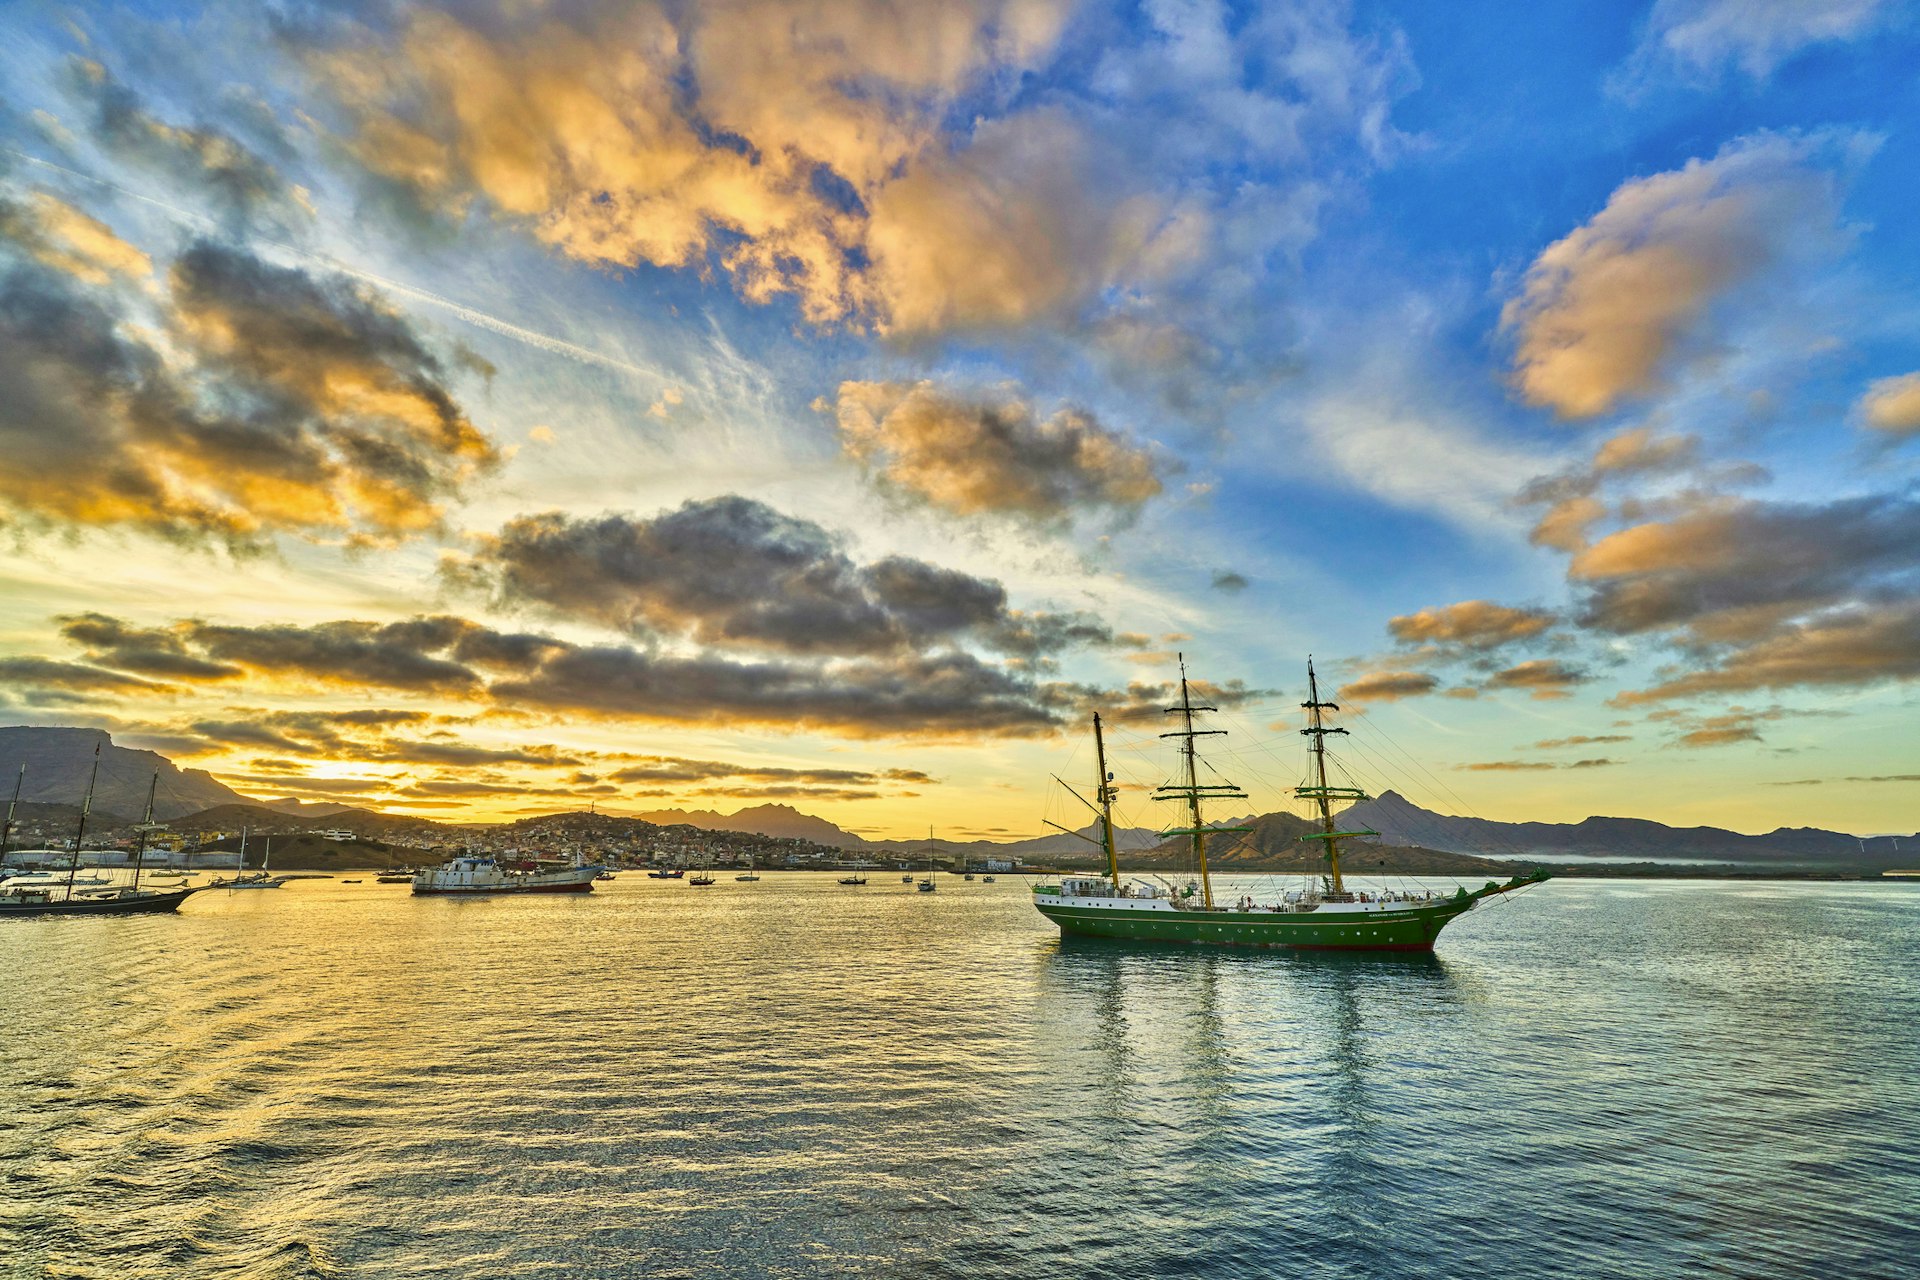 A sail boat in a bay off the coast of an island at sunset